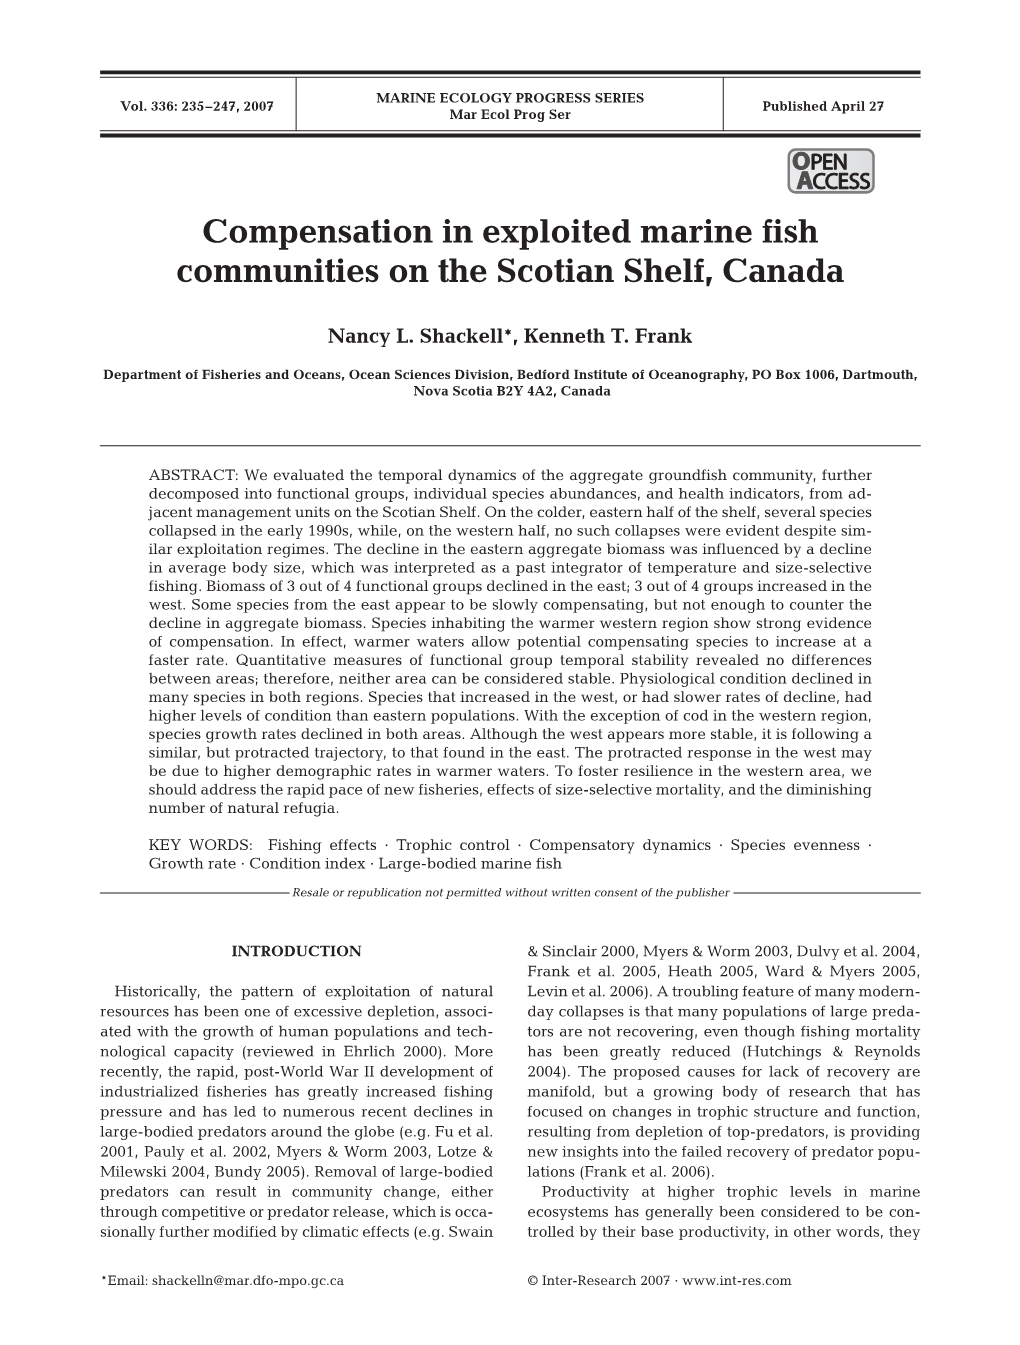 Compensation in Exploited Marine Fish Communities on the Scotian Shelf, Canada